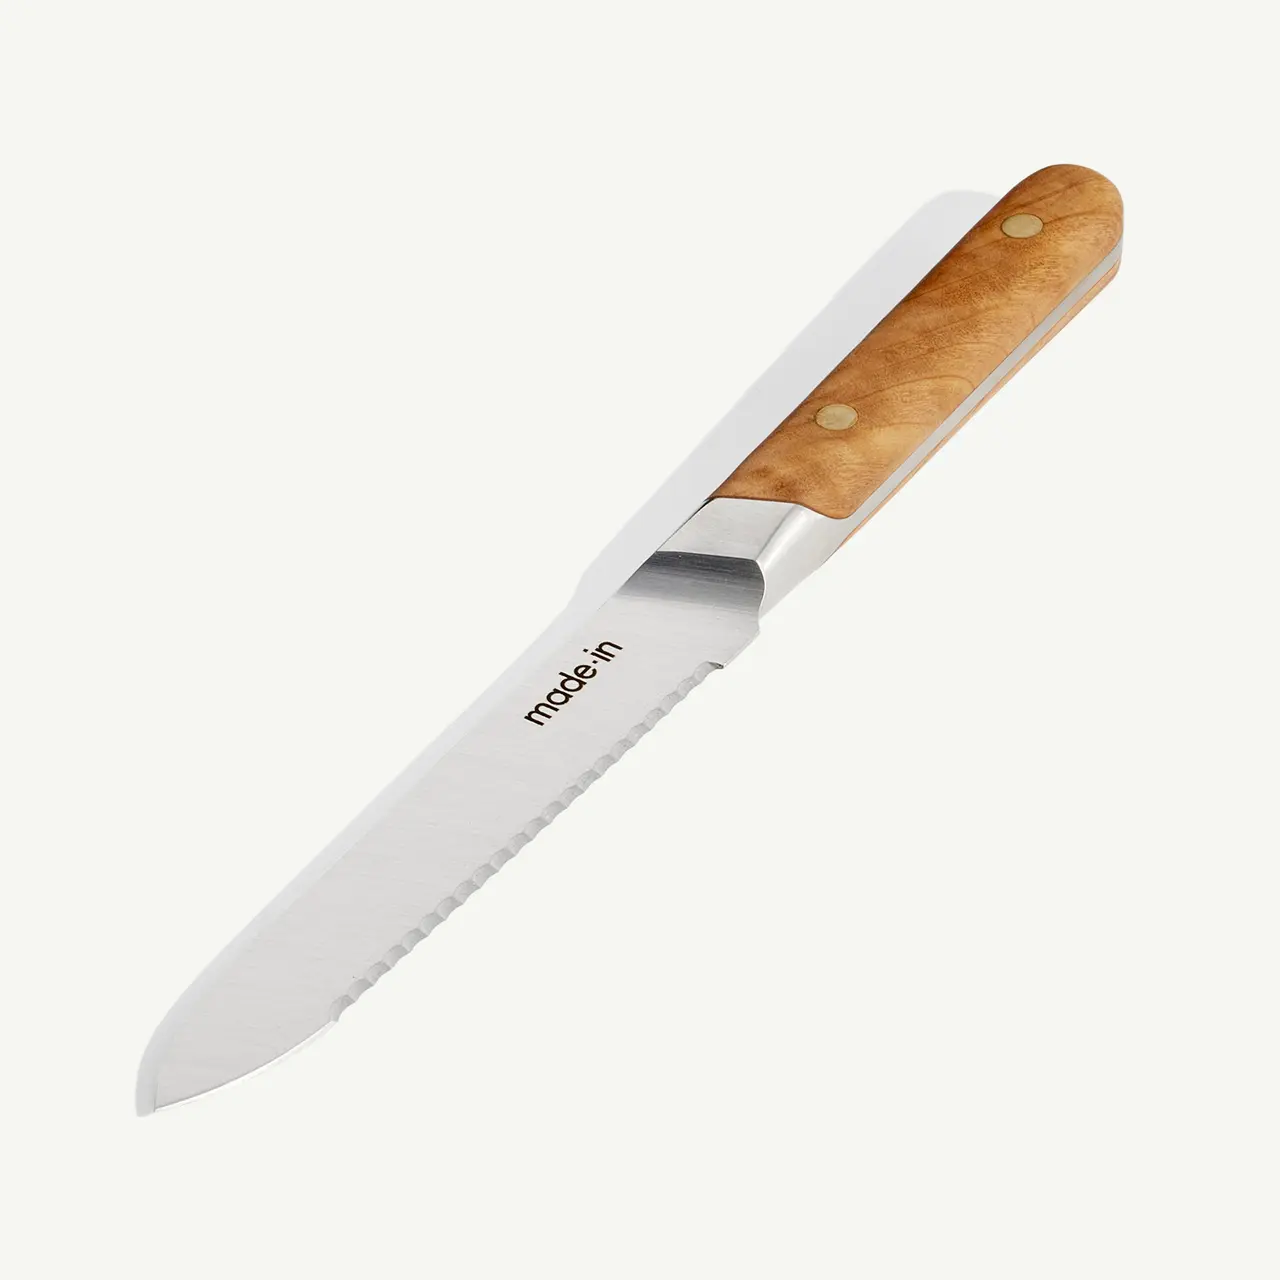 A stainless steel kitchen knife with a wooden handle is displayed against a white background.